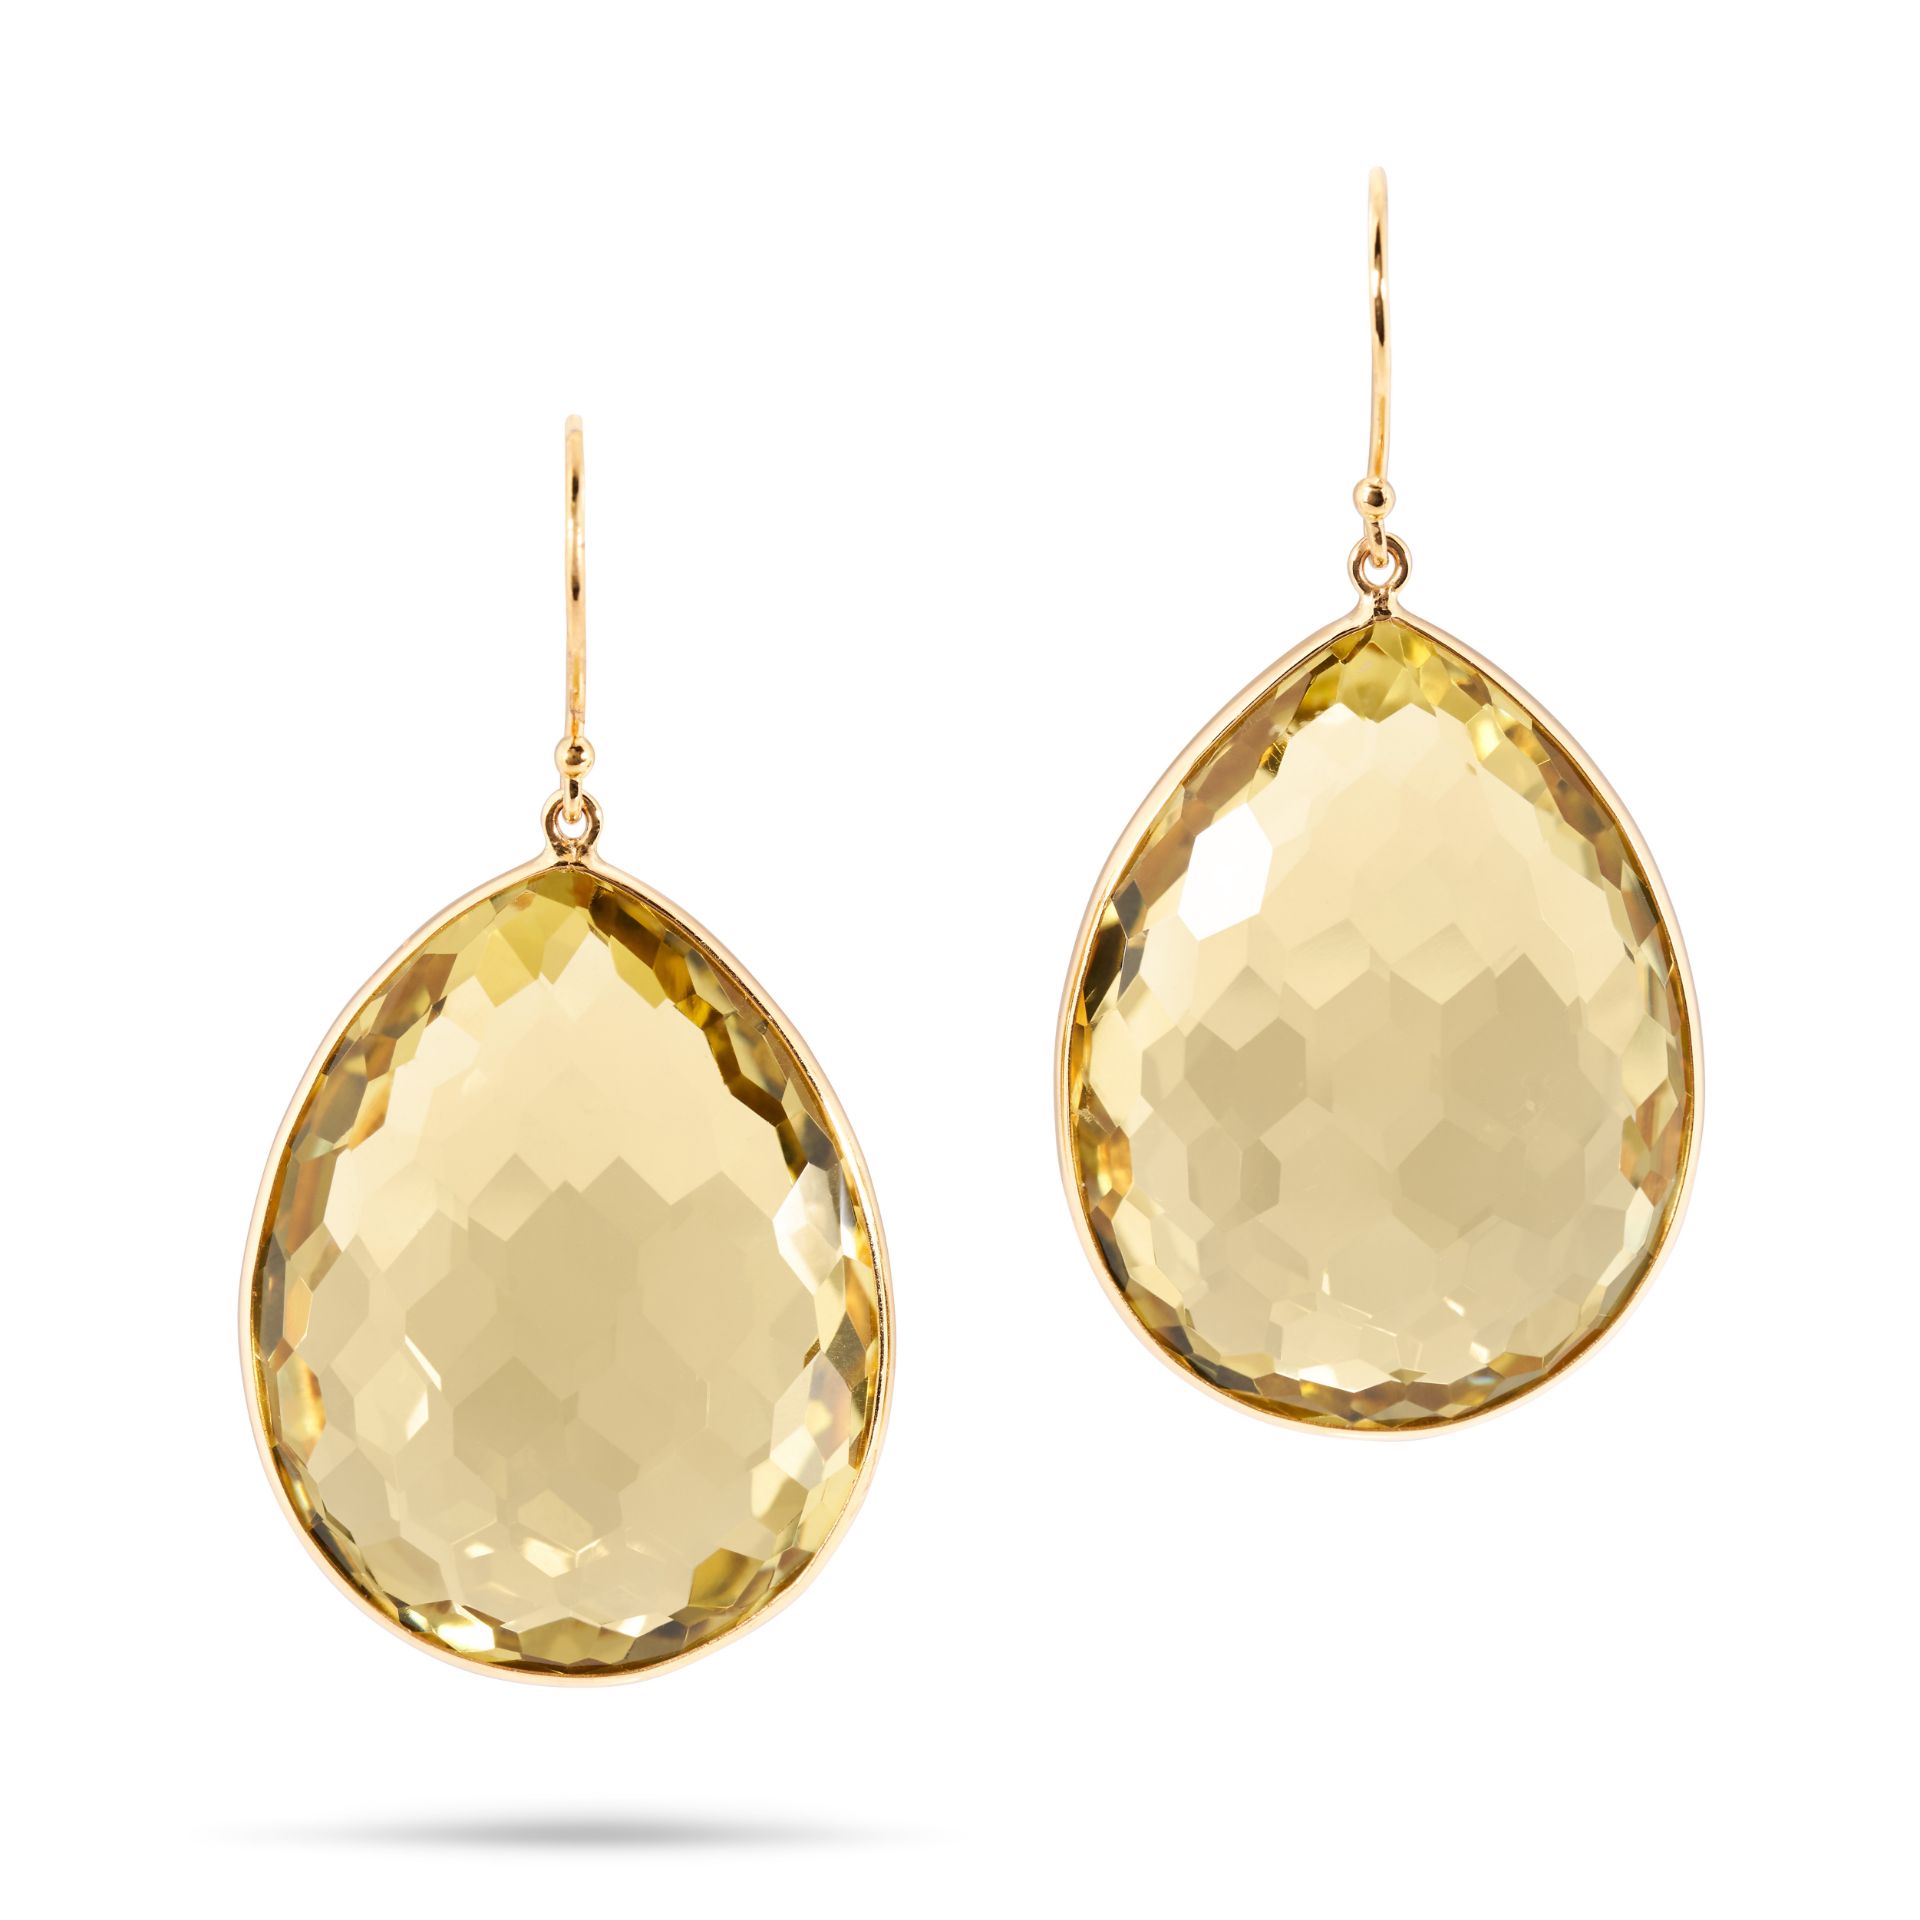 A PAIR OF LEMON QUARTZ DROP EARRINGS in 18ct yellow gold, each suspending a pear shaped faceted l...